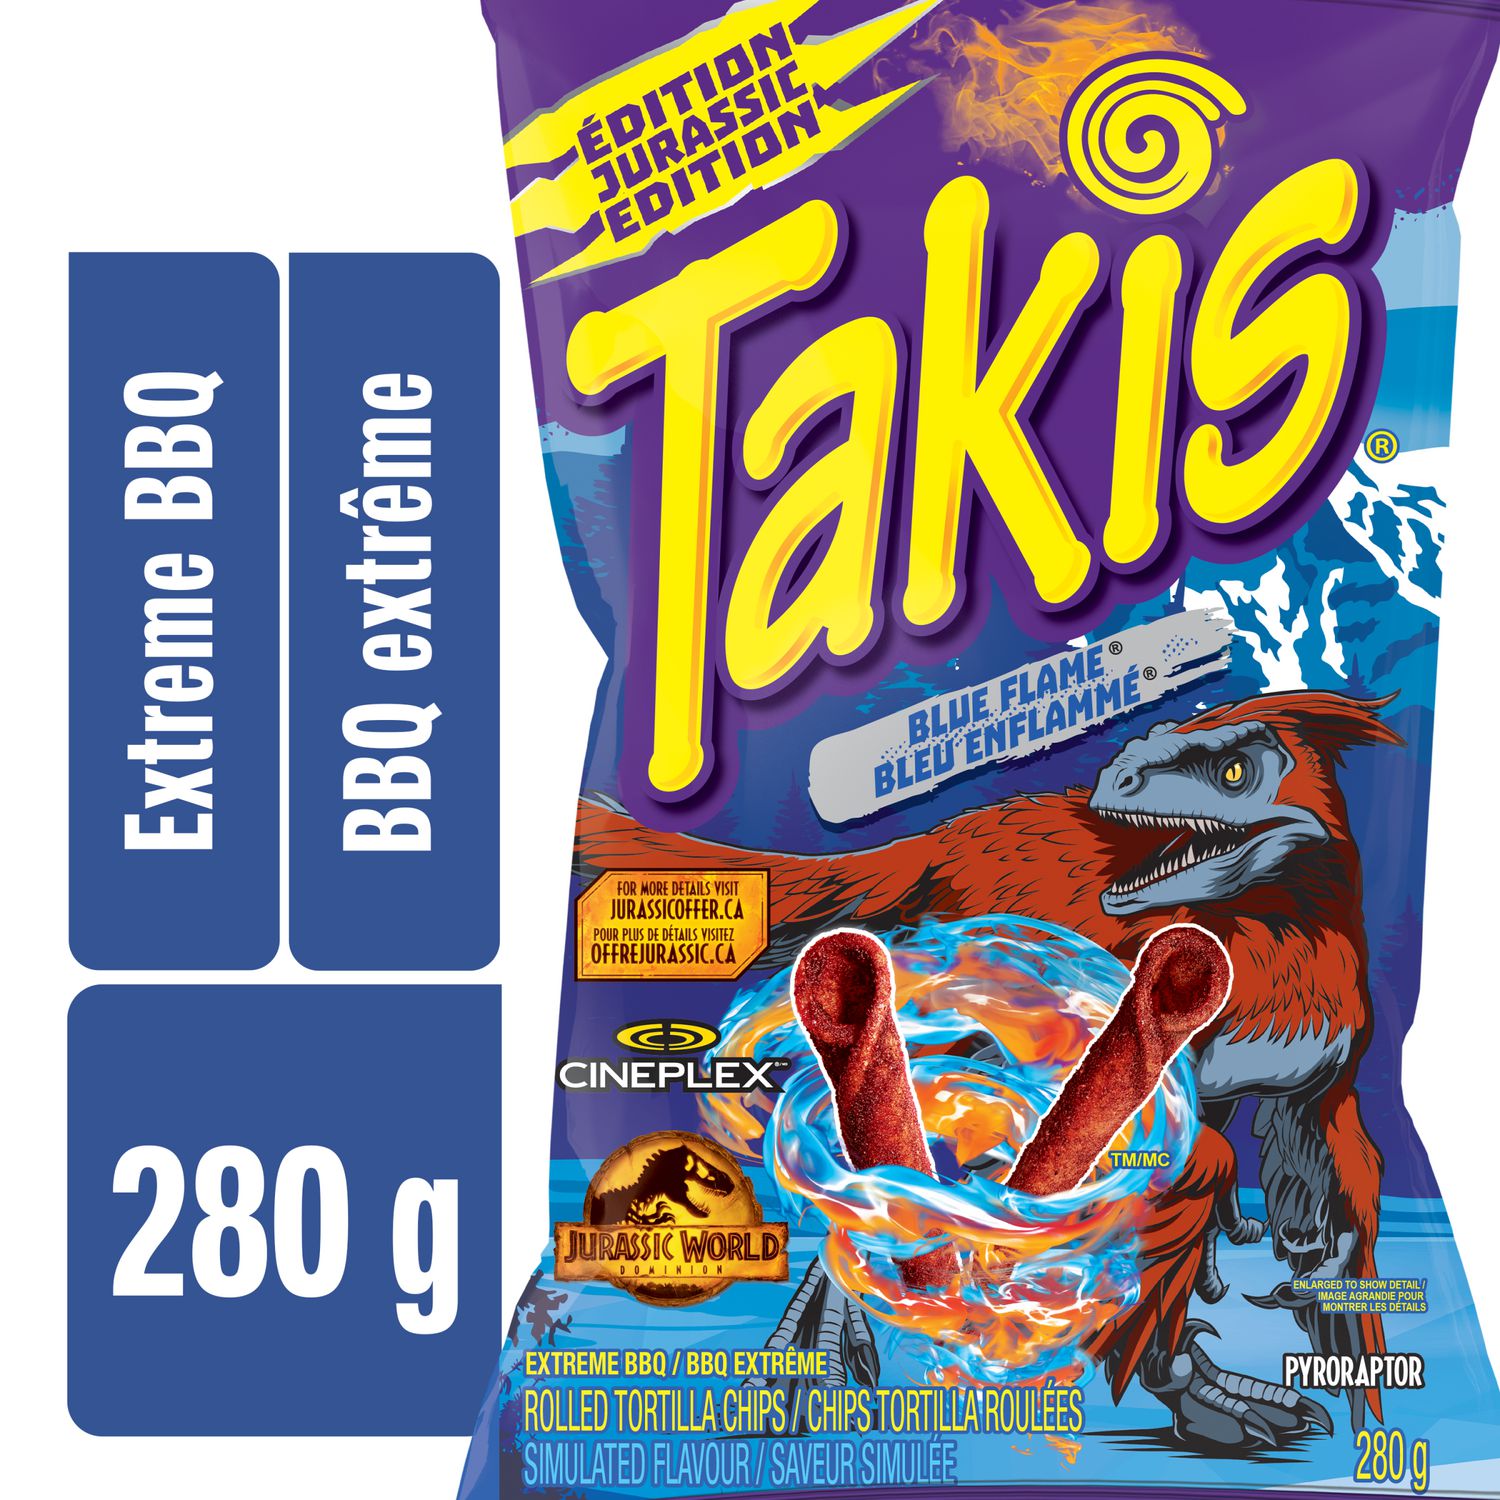 Turn your tongue blue with TAKIS® Blue Flame Extreme BBQ Rolled Tortilla Ch...